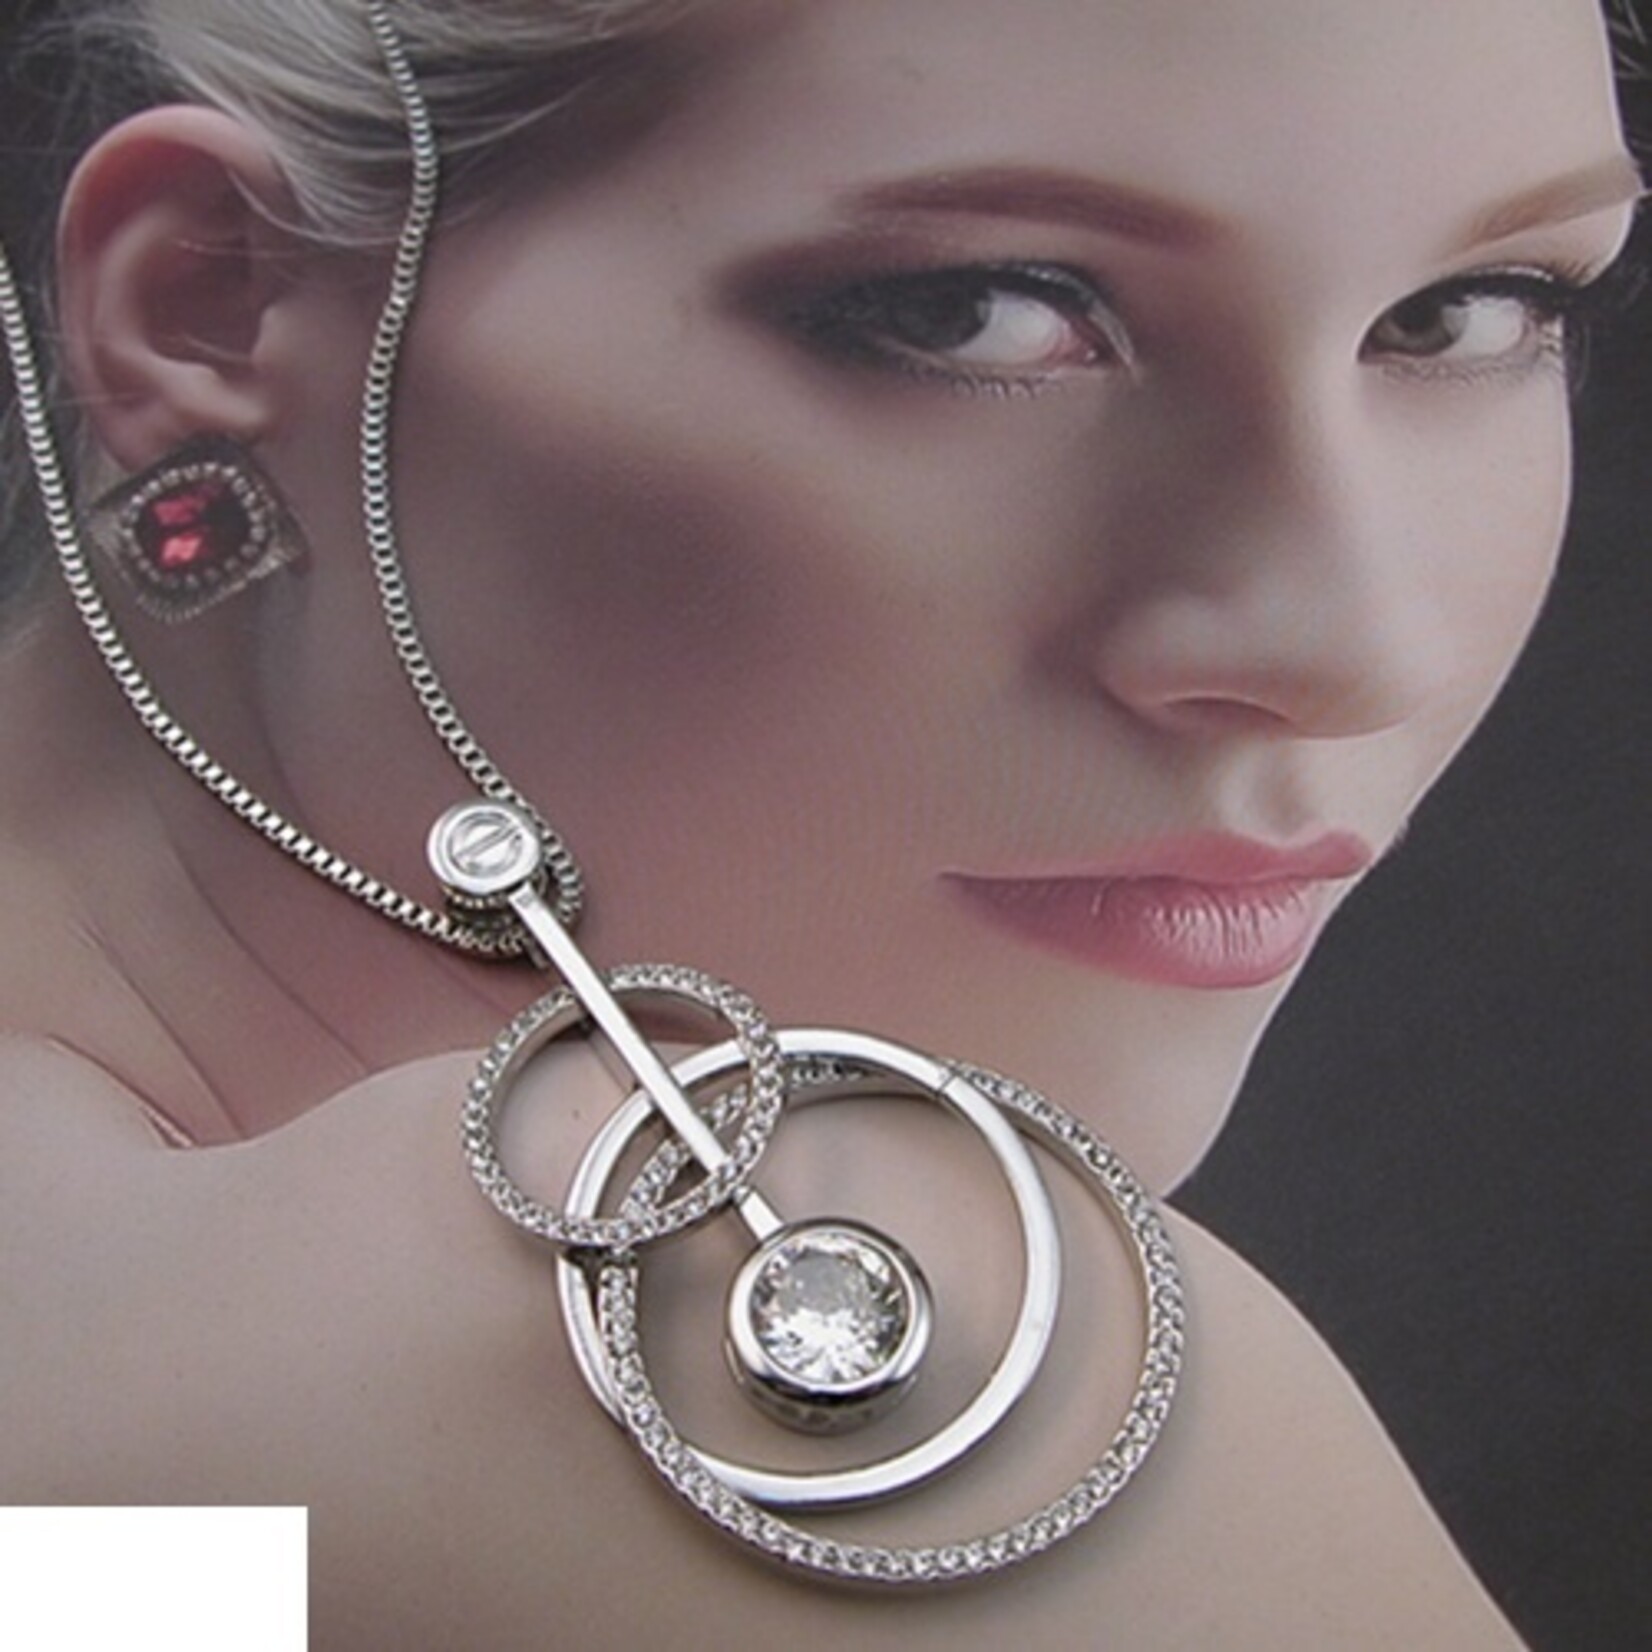 fashion jewelry Fashion jewelry necklace with multi circles and stone in middle